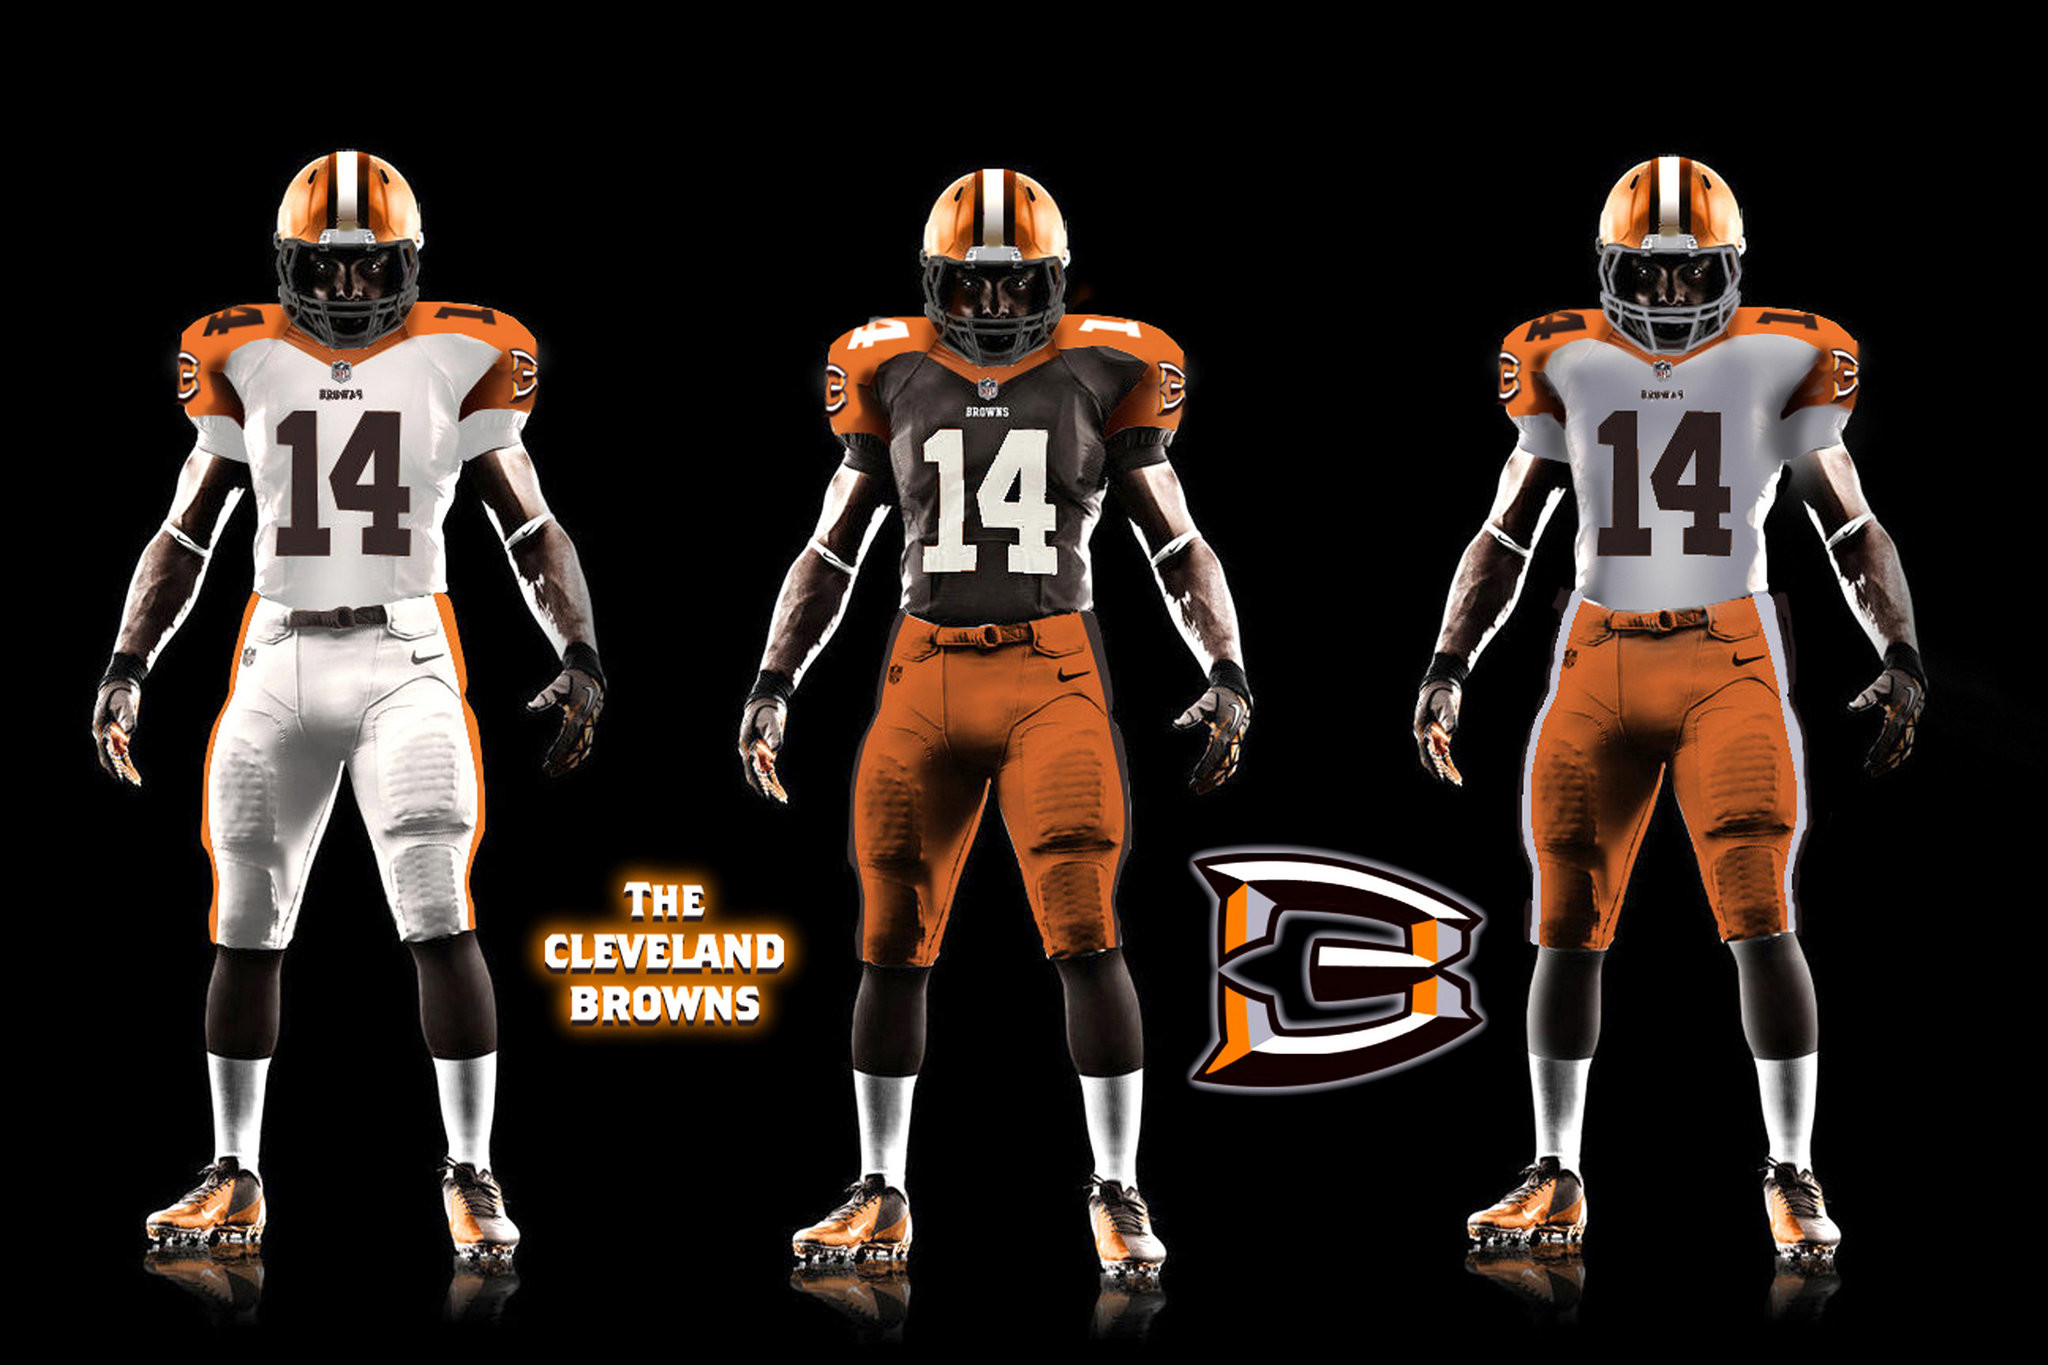 2048x1365 Cleveland Browns Picture Free Download by Avdotya Nassi